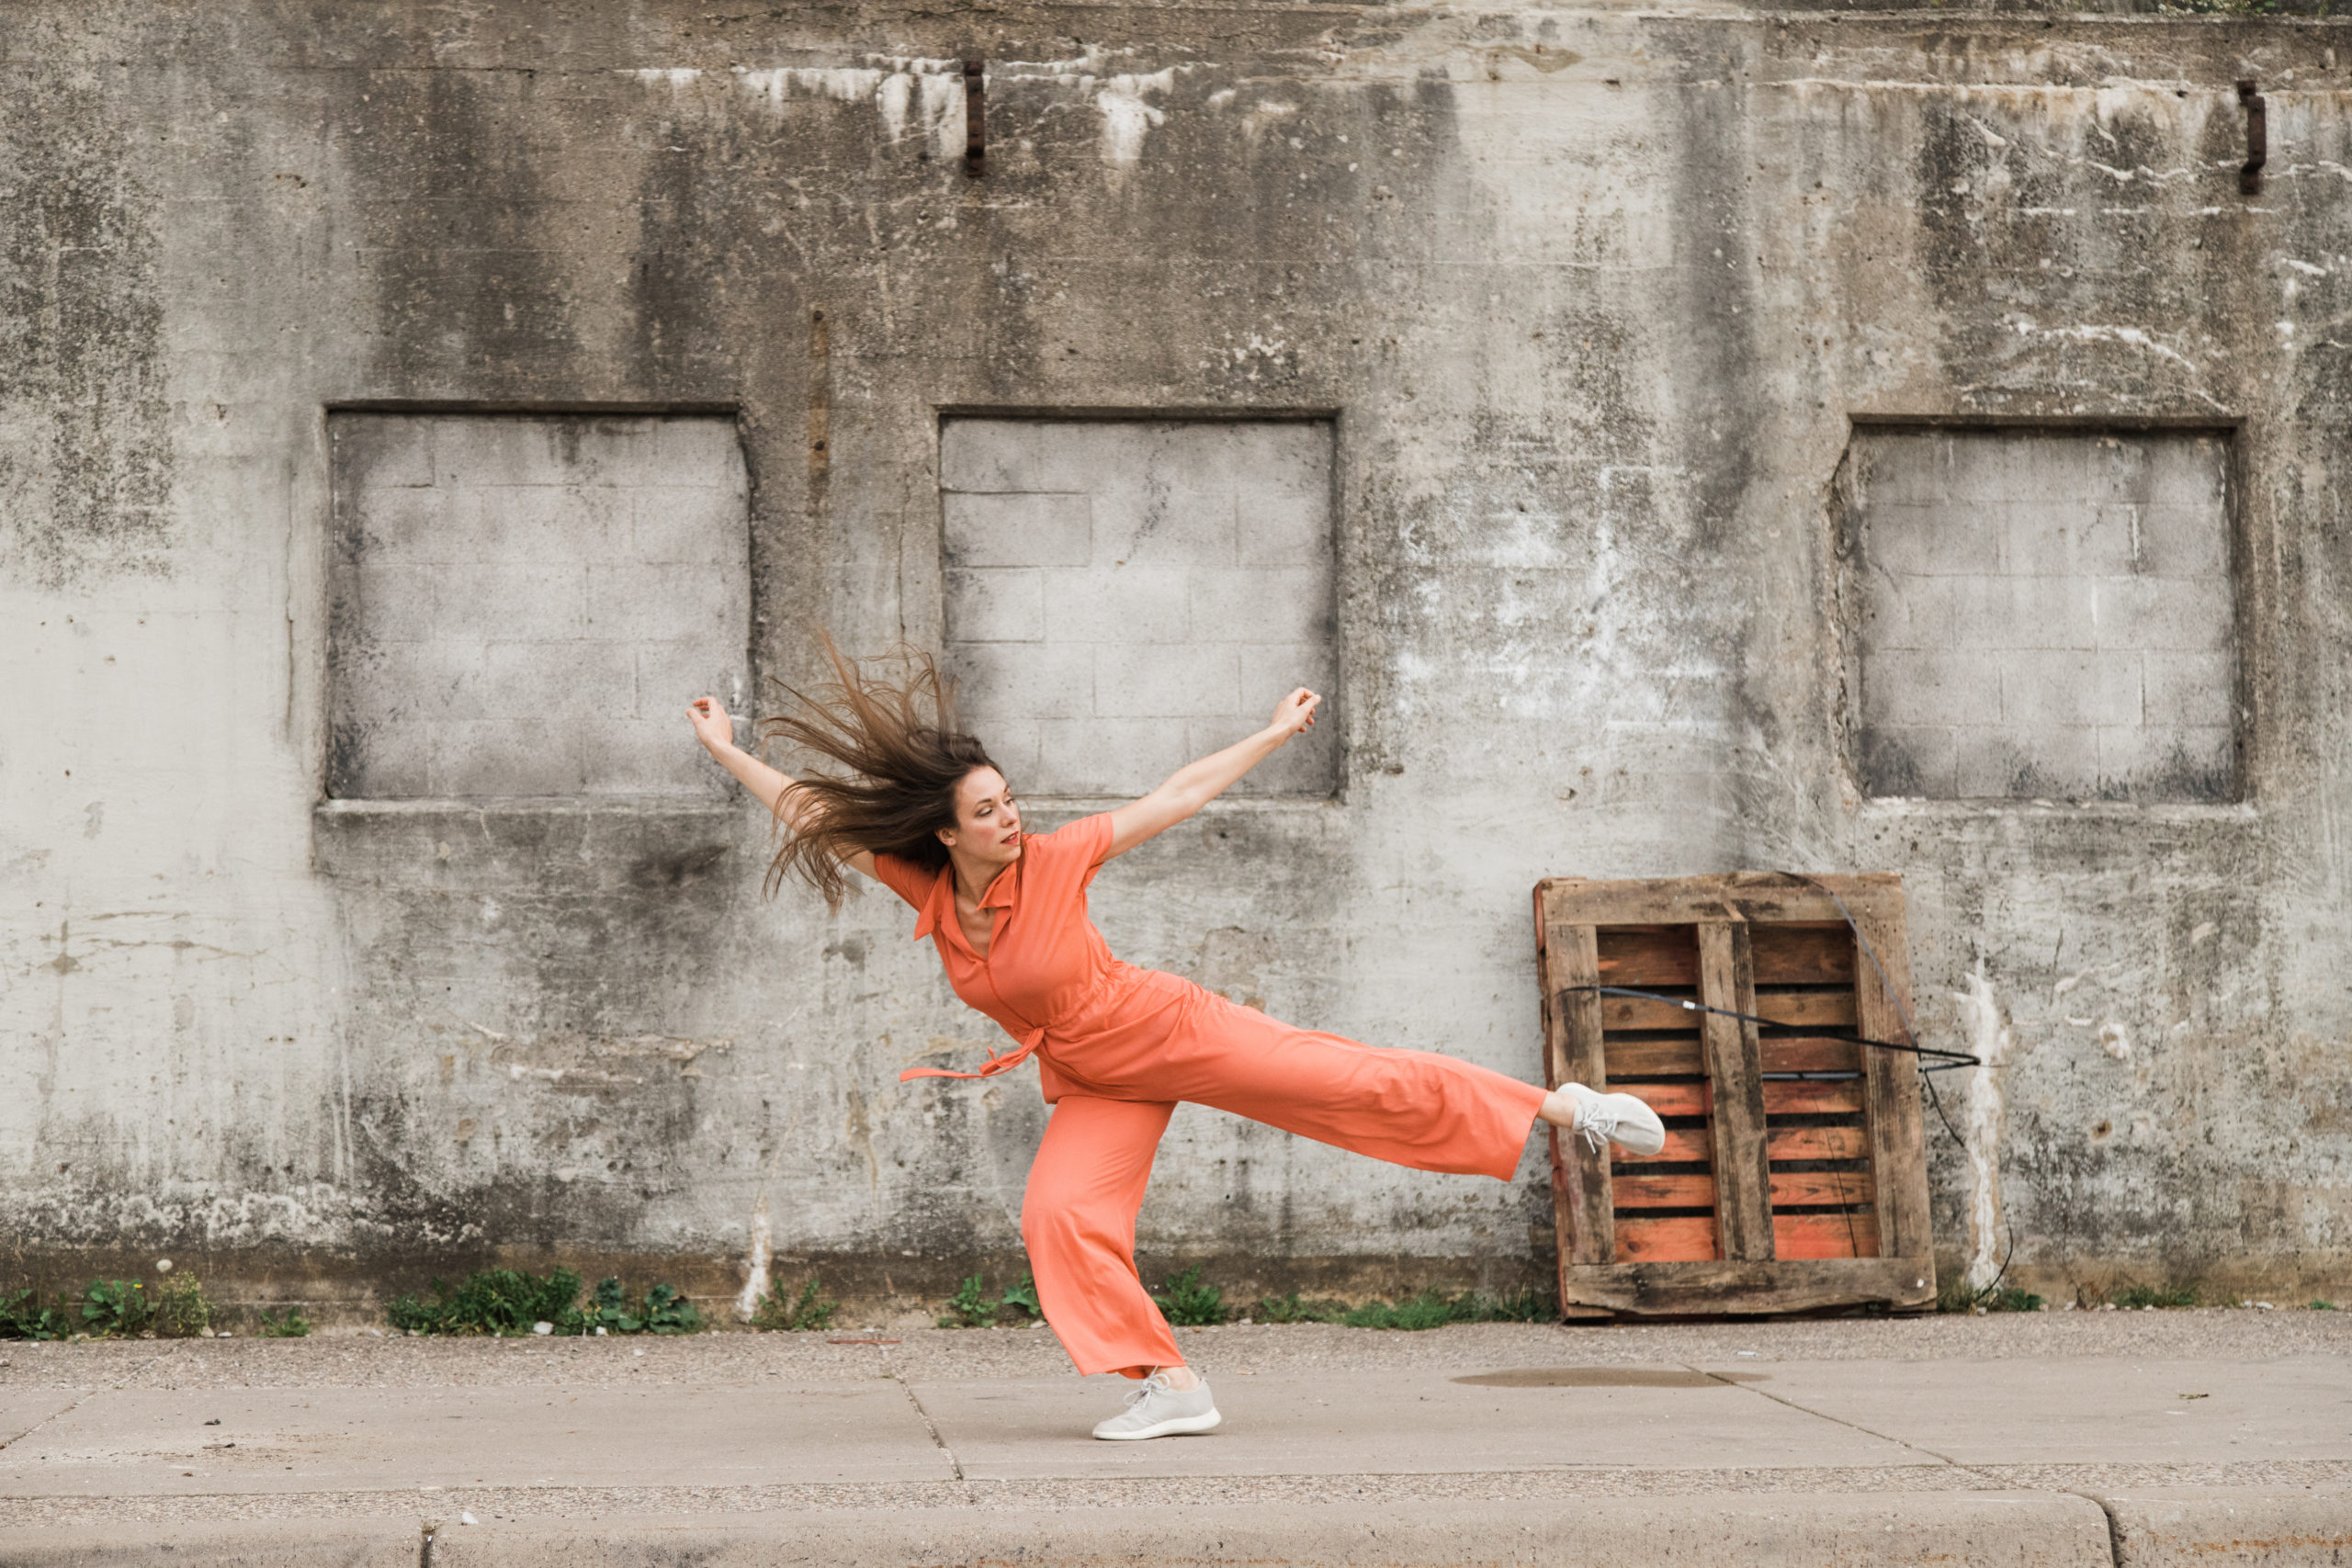 Alexandra Bodnarchuk is a white woman with long brown hair. She wears a short-sleeved orange jumpsuit with a tie waist, and she lunges forward on her bent right leg while her left leg, arms and hair extend outward.